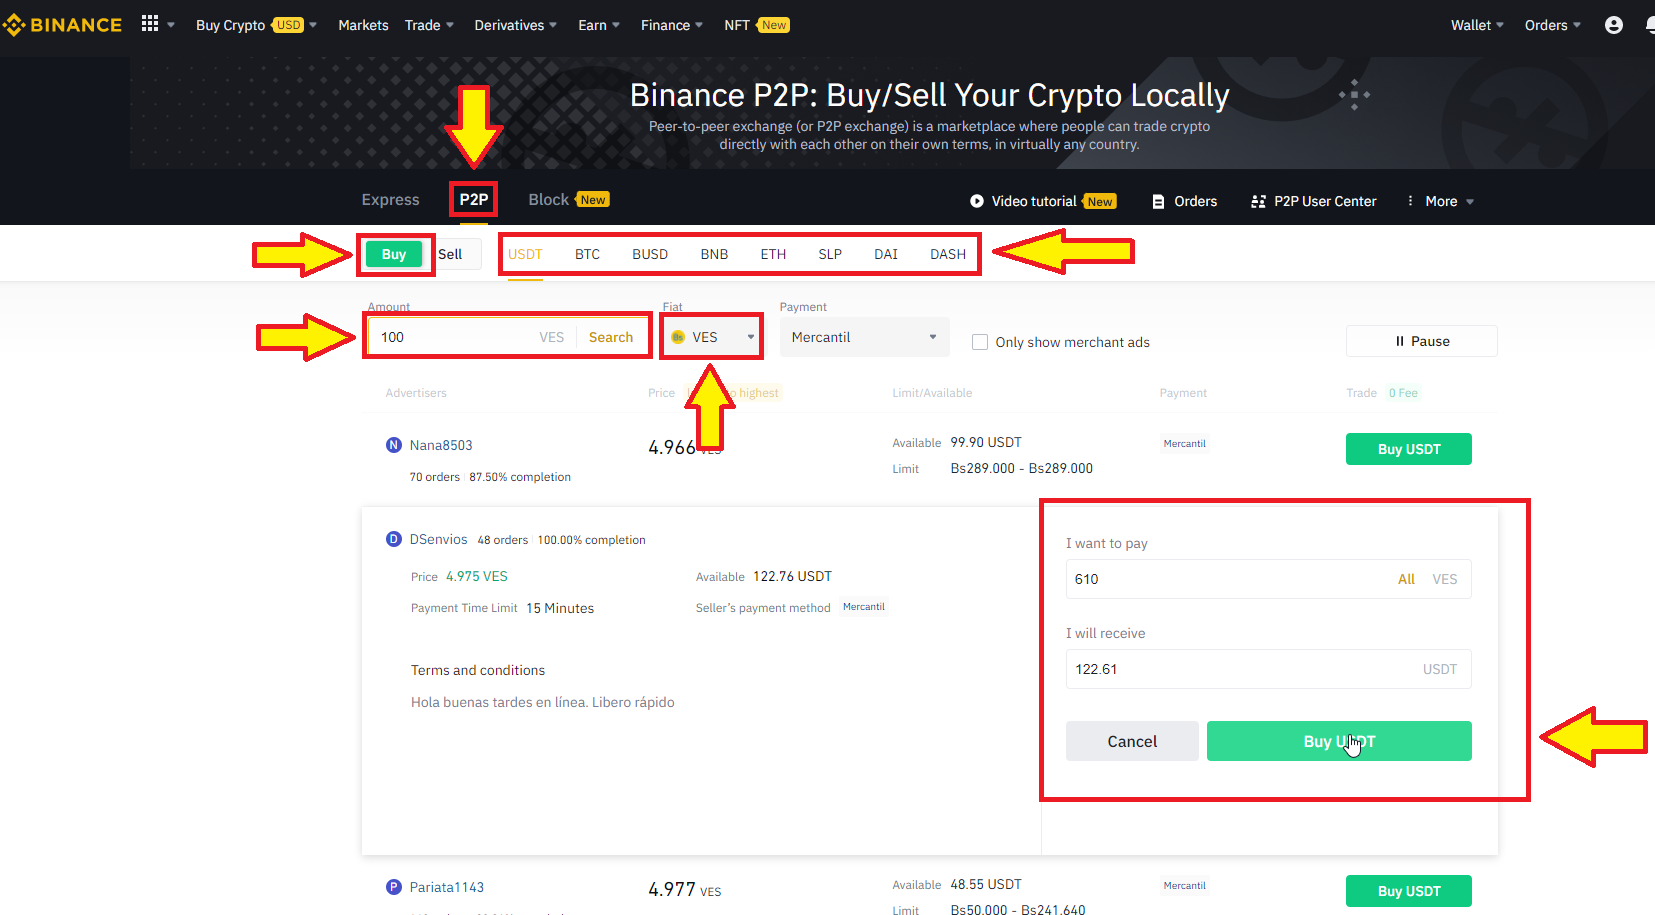 Buy Dusk Network crypto in P2P with a verified account on Binance